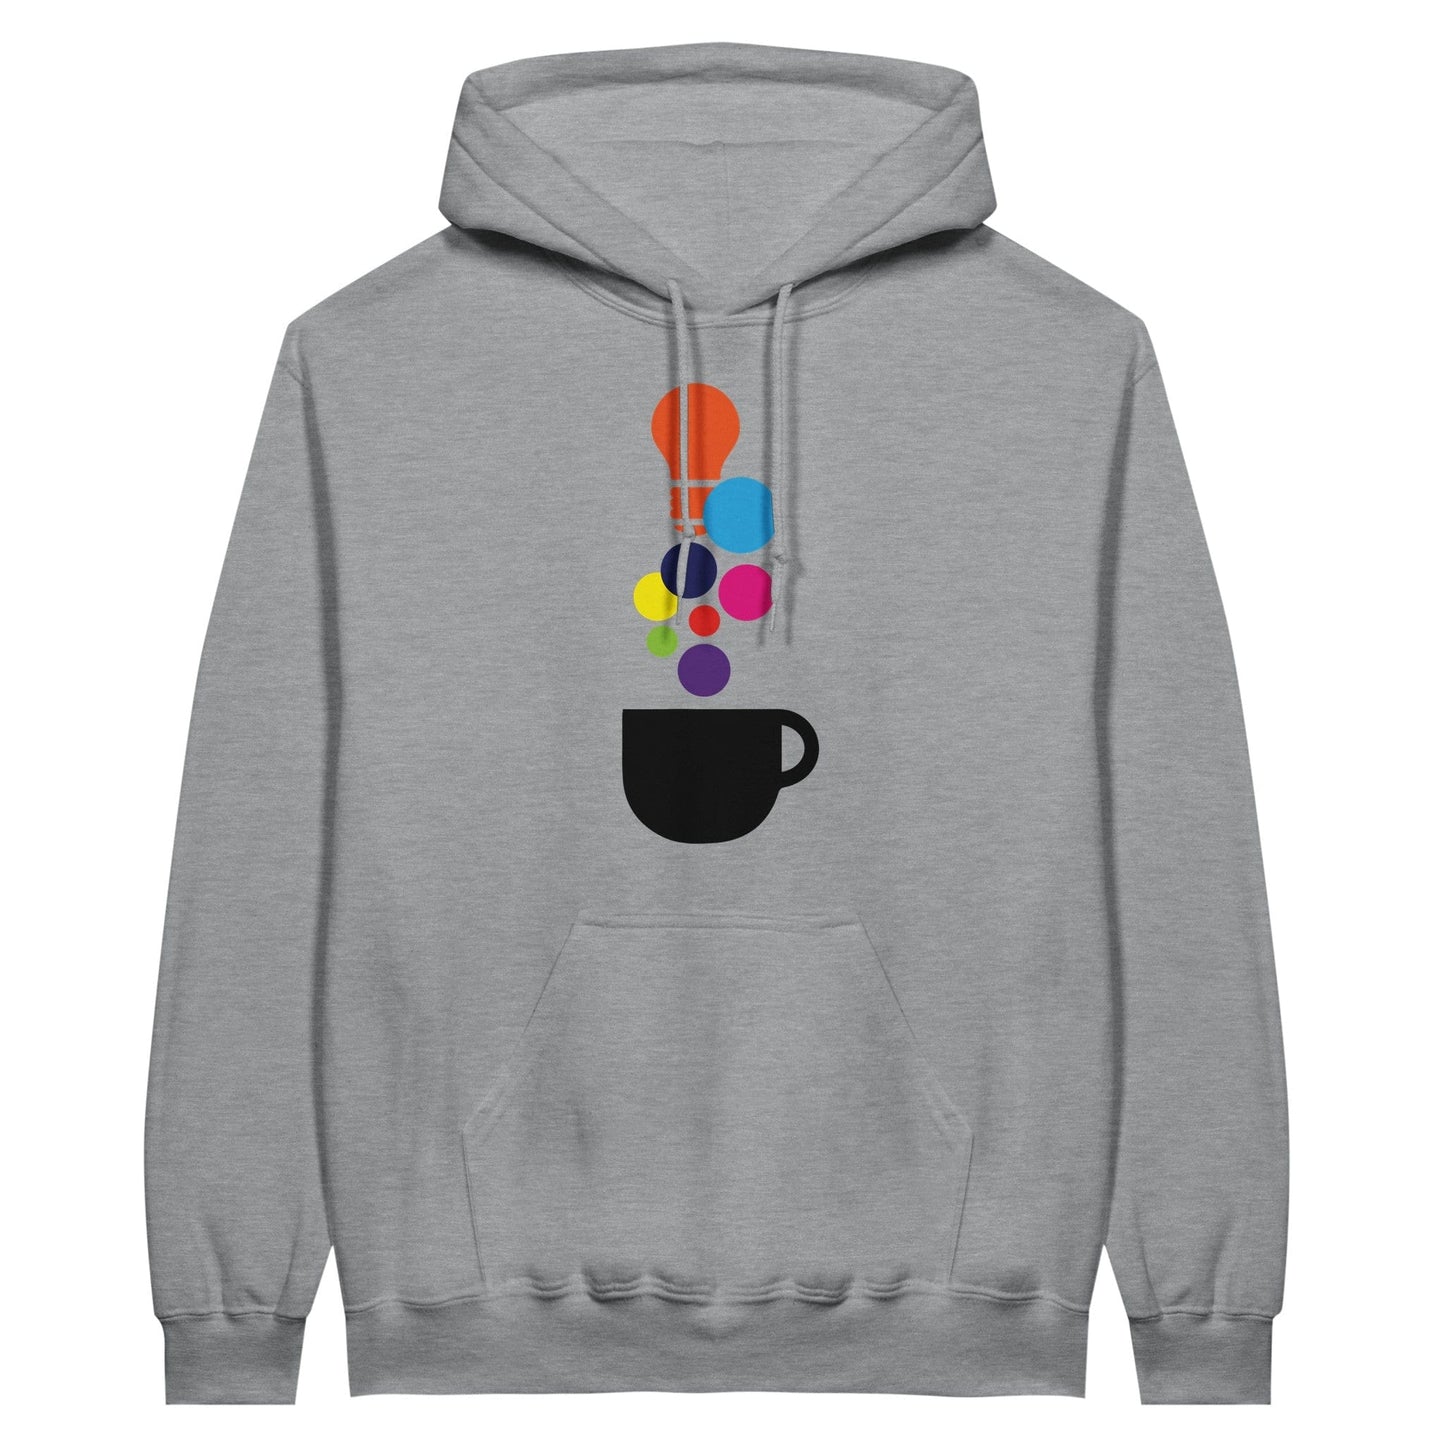 Good Bean Gifts "Creativity in a Cup" - Classic Unisex Pullover Hoodie S / Sports Grey